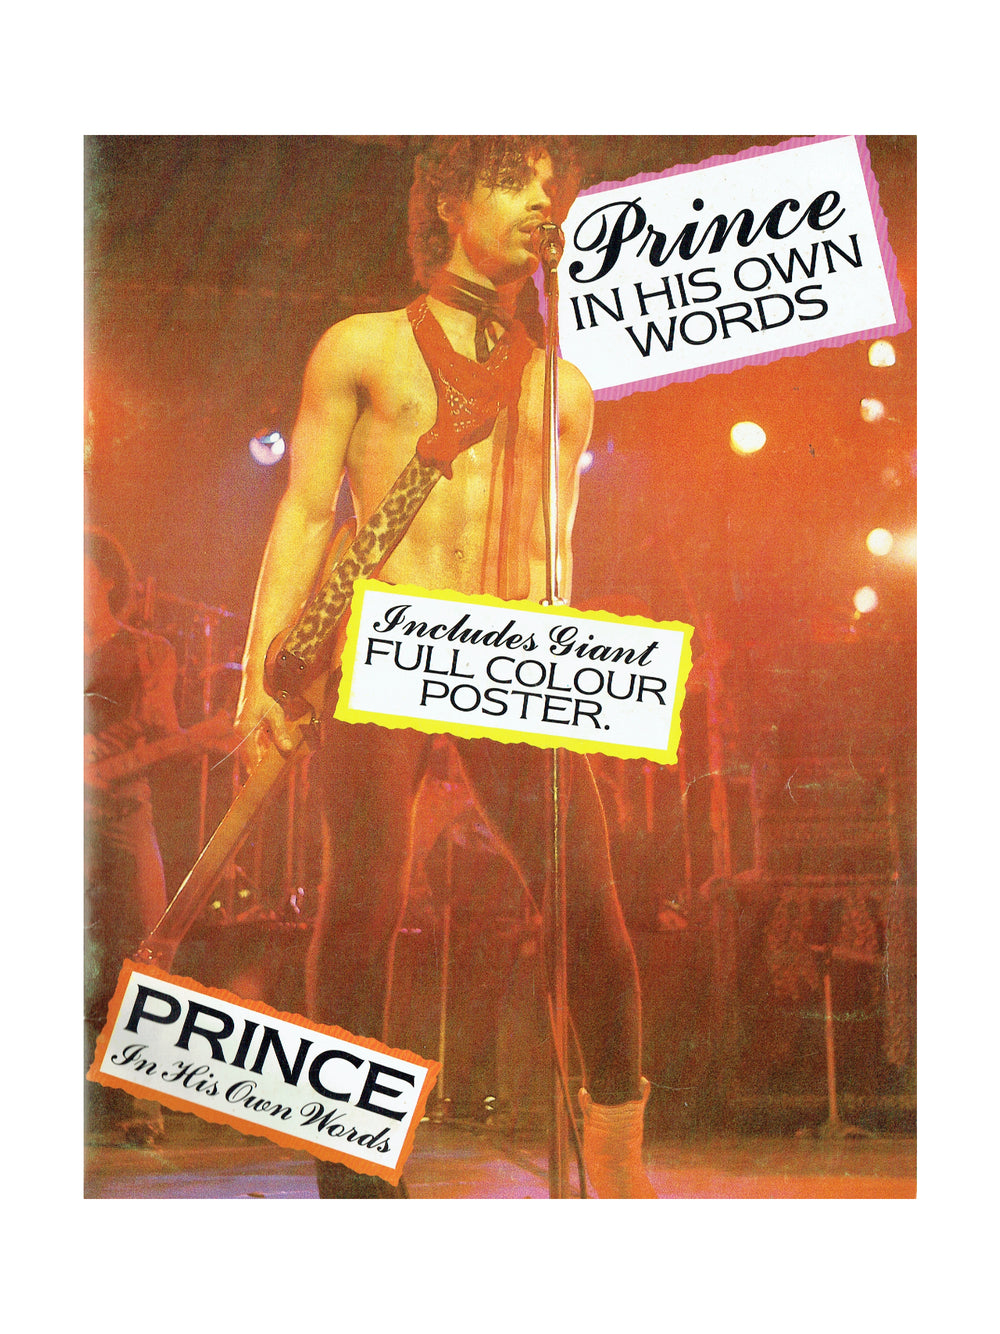 Prince – In His Own Words Softback Book Published 1984 & Poster Very Rare